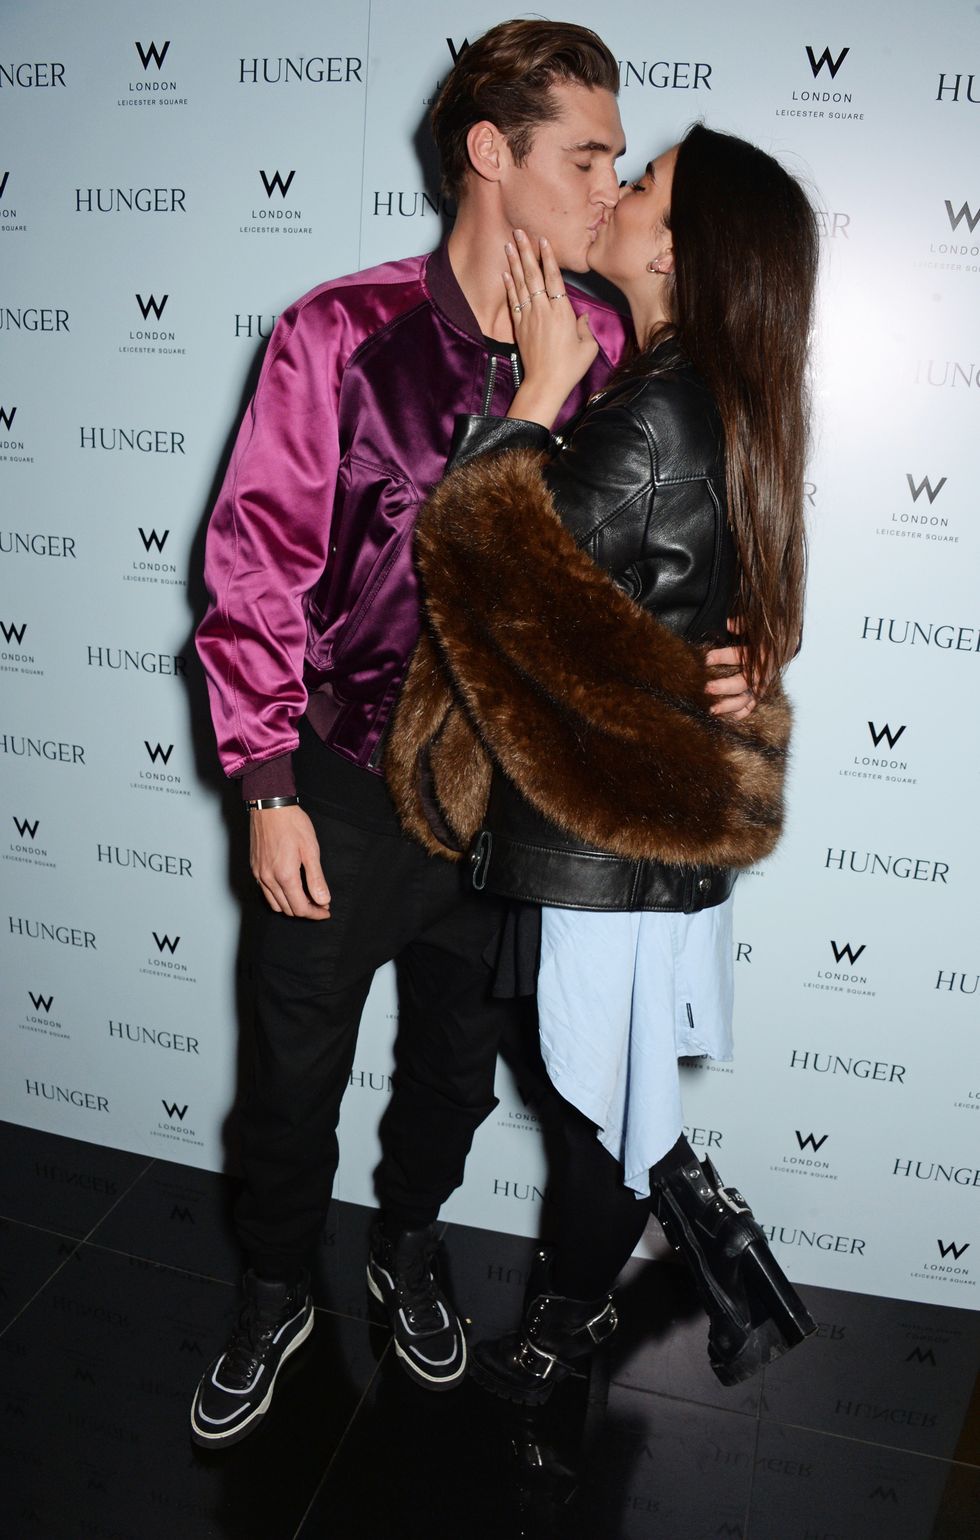 'hunger magazine, we've got issues' launch at w london